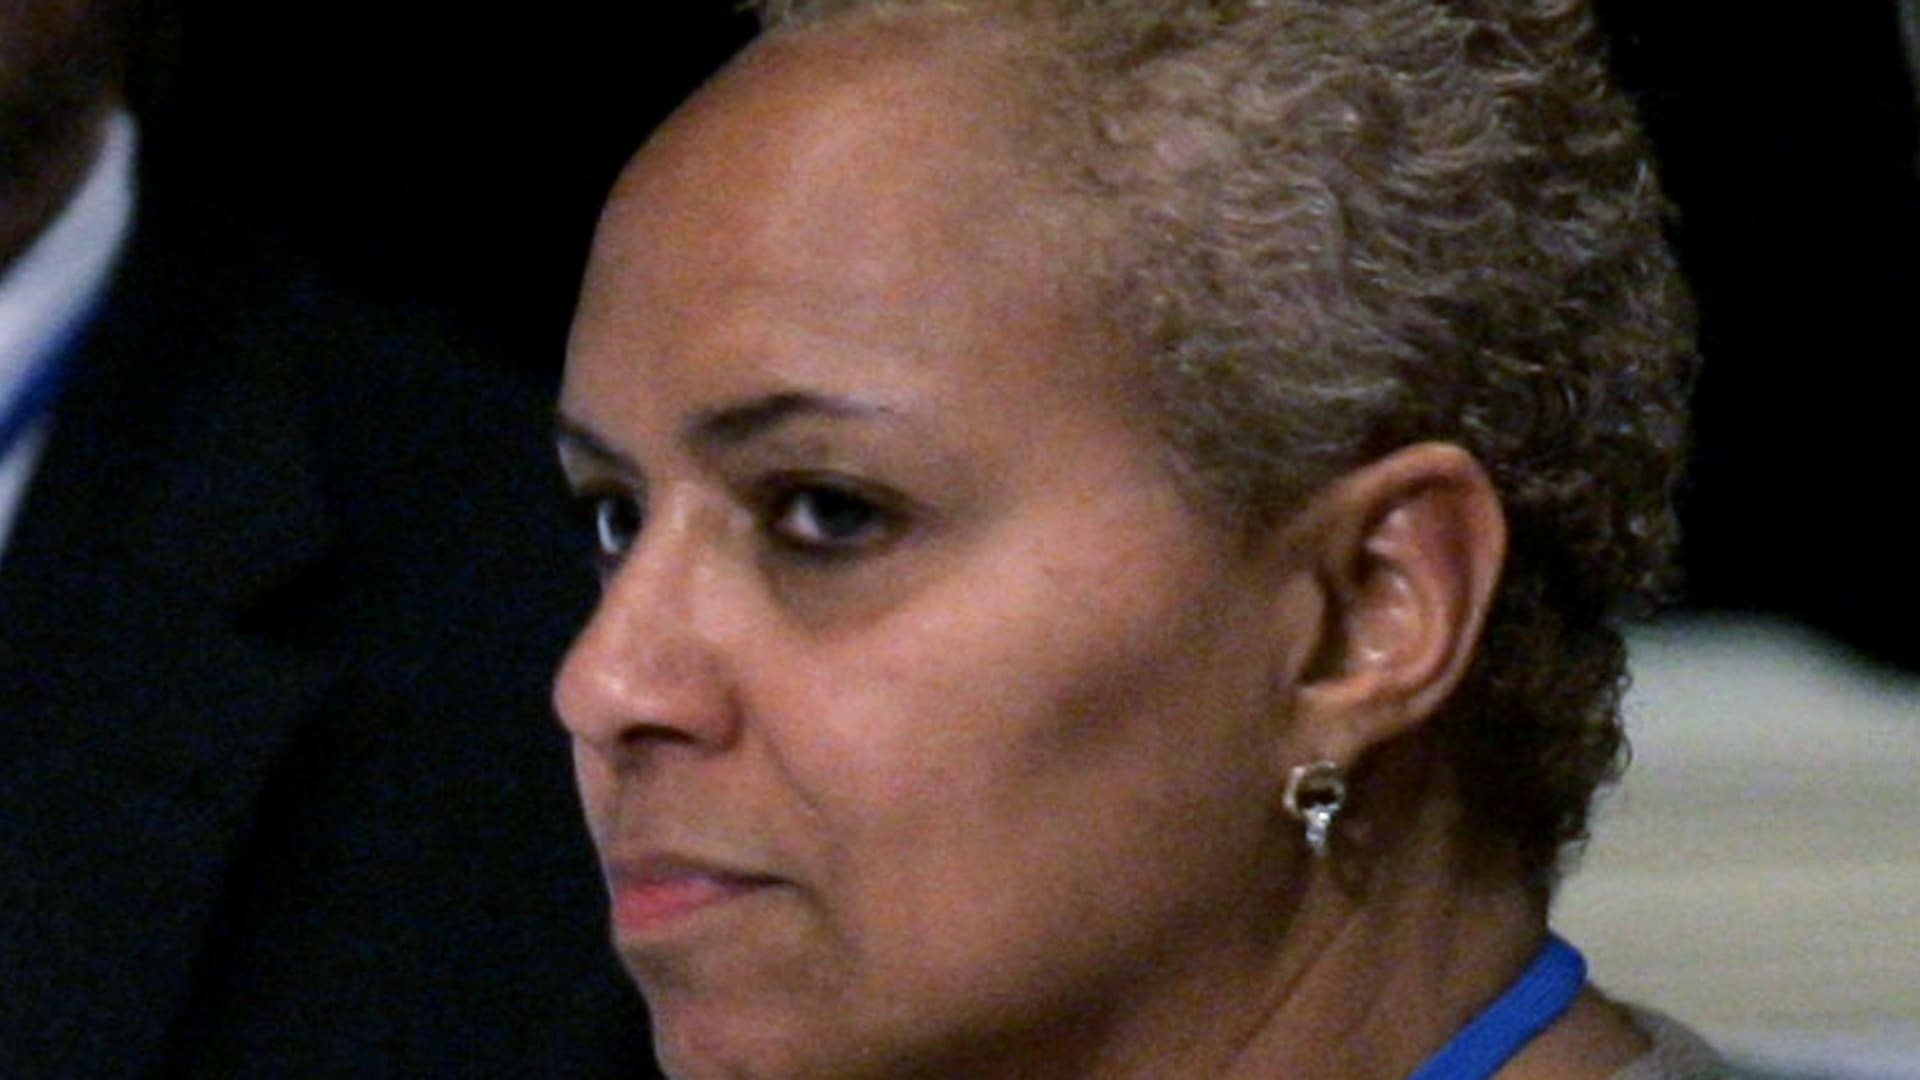 In this May 31, 2008 file photo, Tina Flournoy, then Democratic National Committee Rules and Bylaws committee member, during a hearing in Washington.